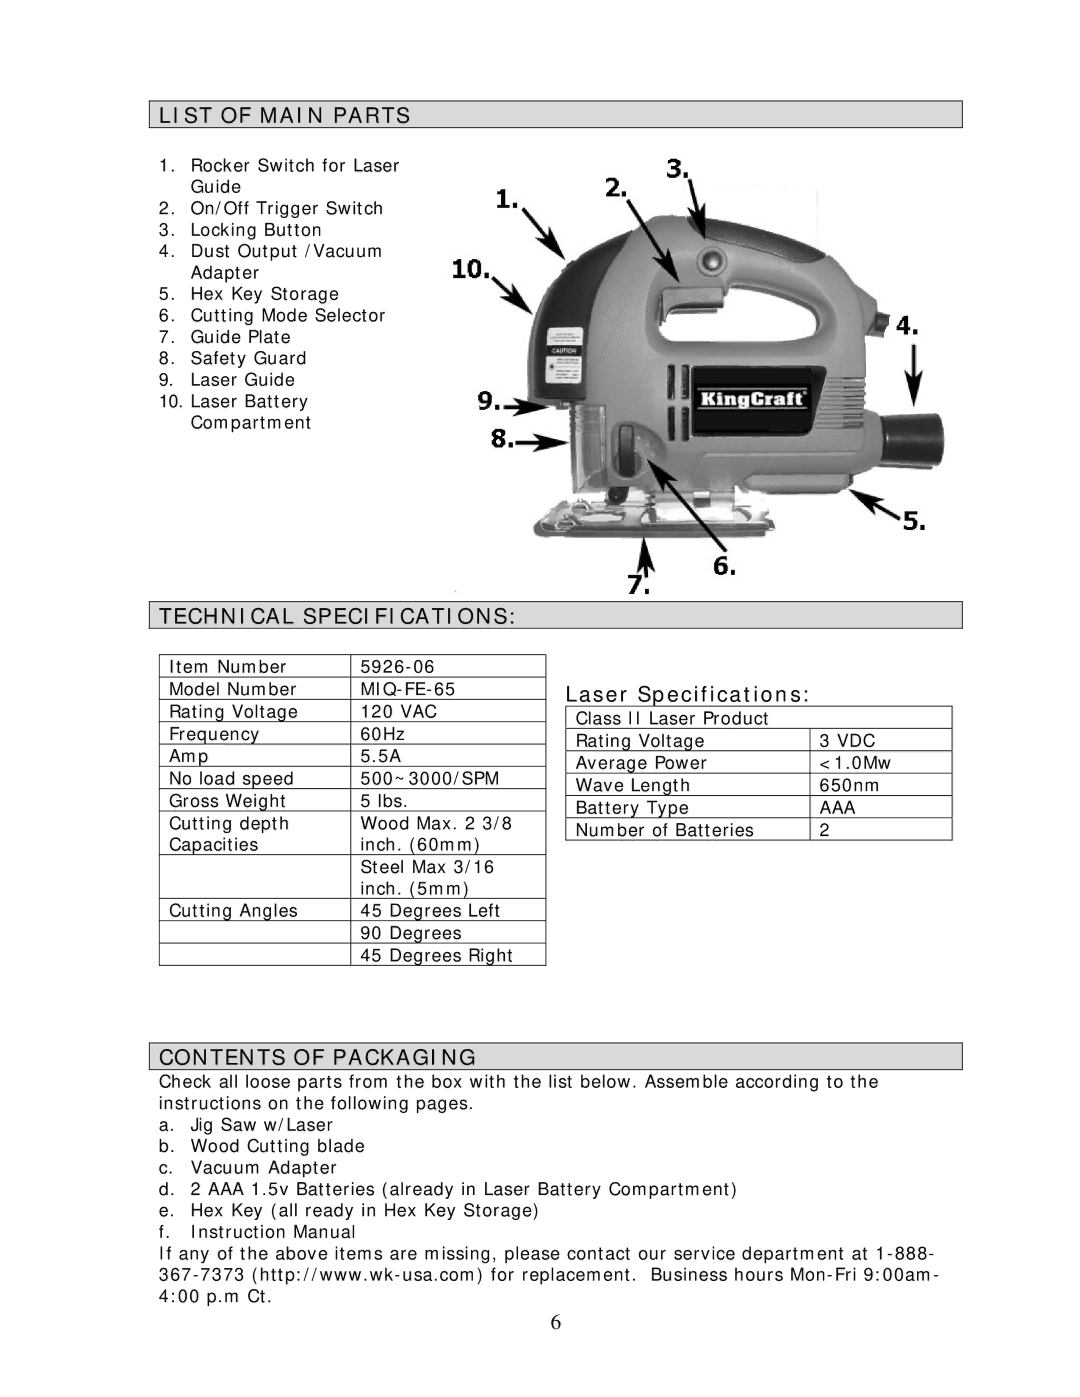 Wachsmuth & Krogmann MIQ-FE-65 manual List of Main Parts, Technical Specifications, Contents of Packaging 